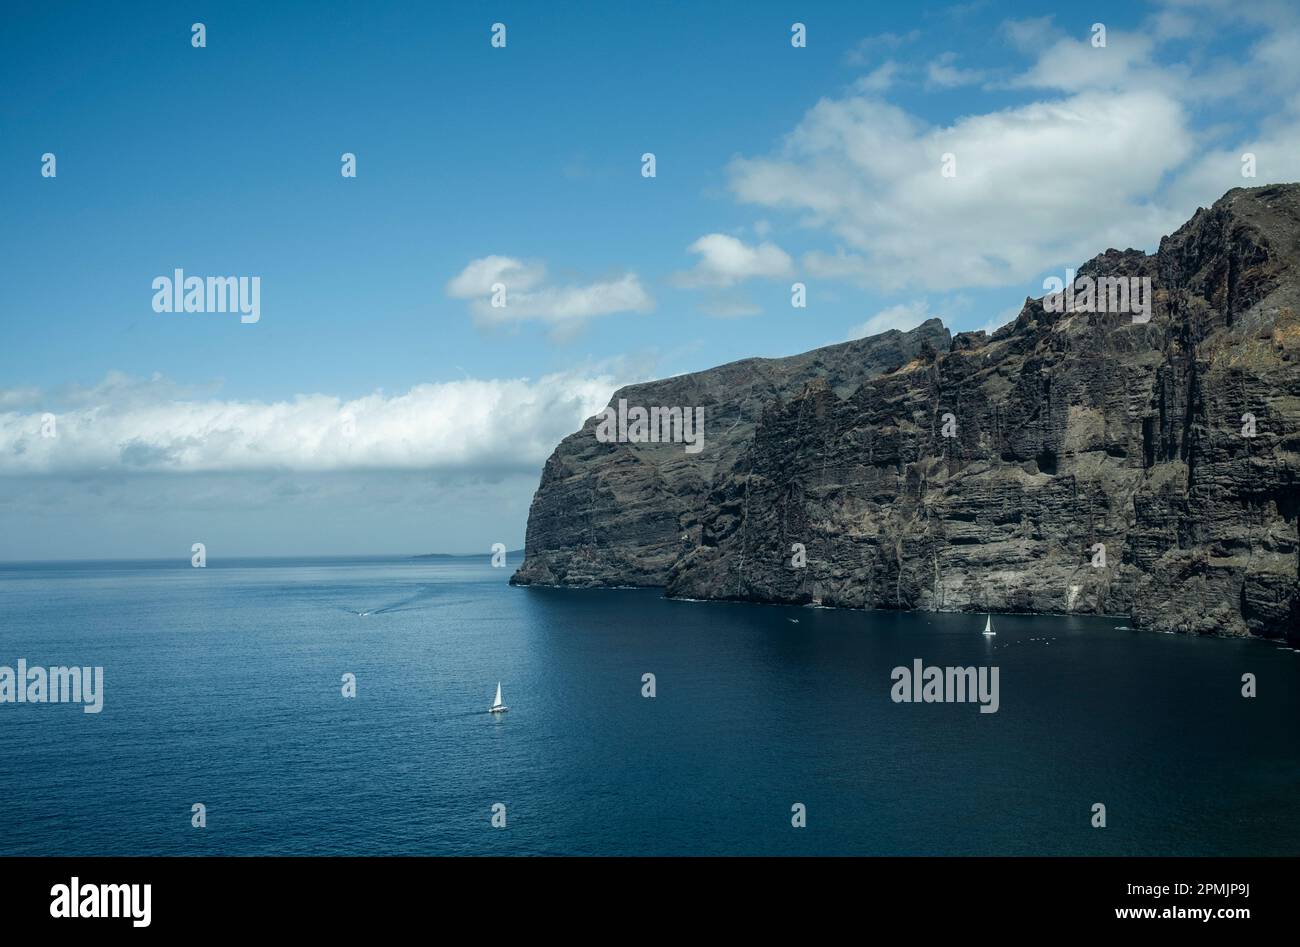 Tenerife, 20-24.03.23: Cliff by Los Gigantes, Travel pictures. Stock Photo